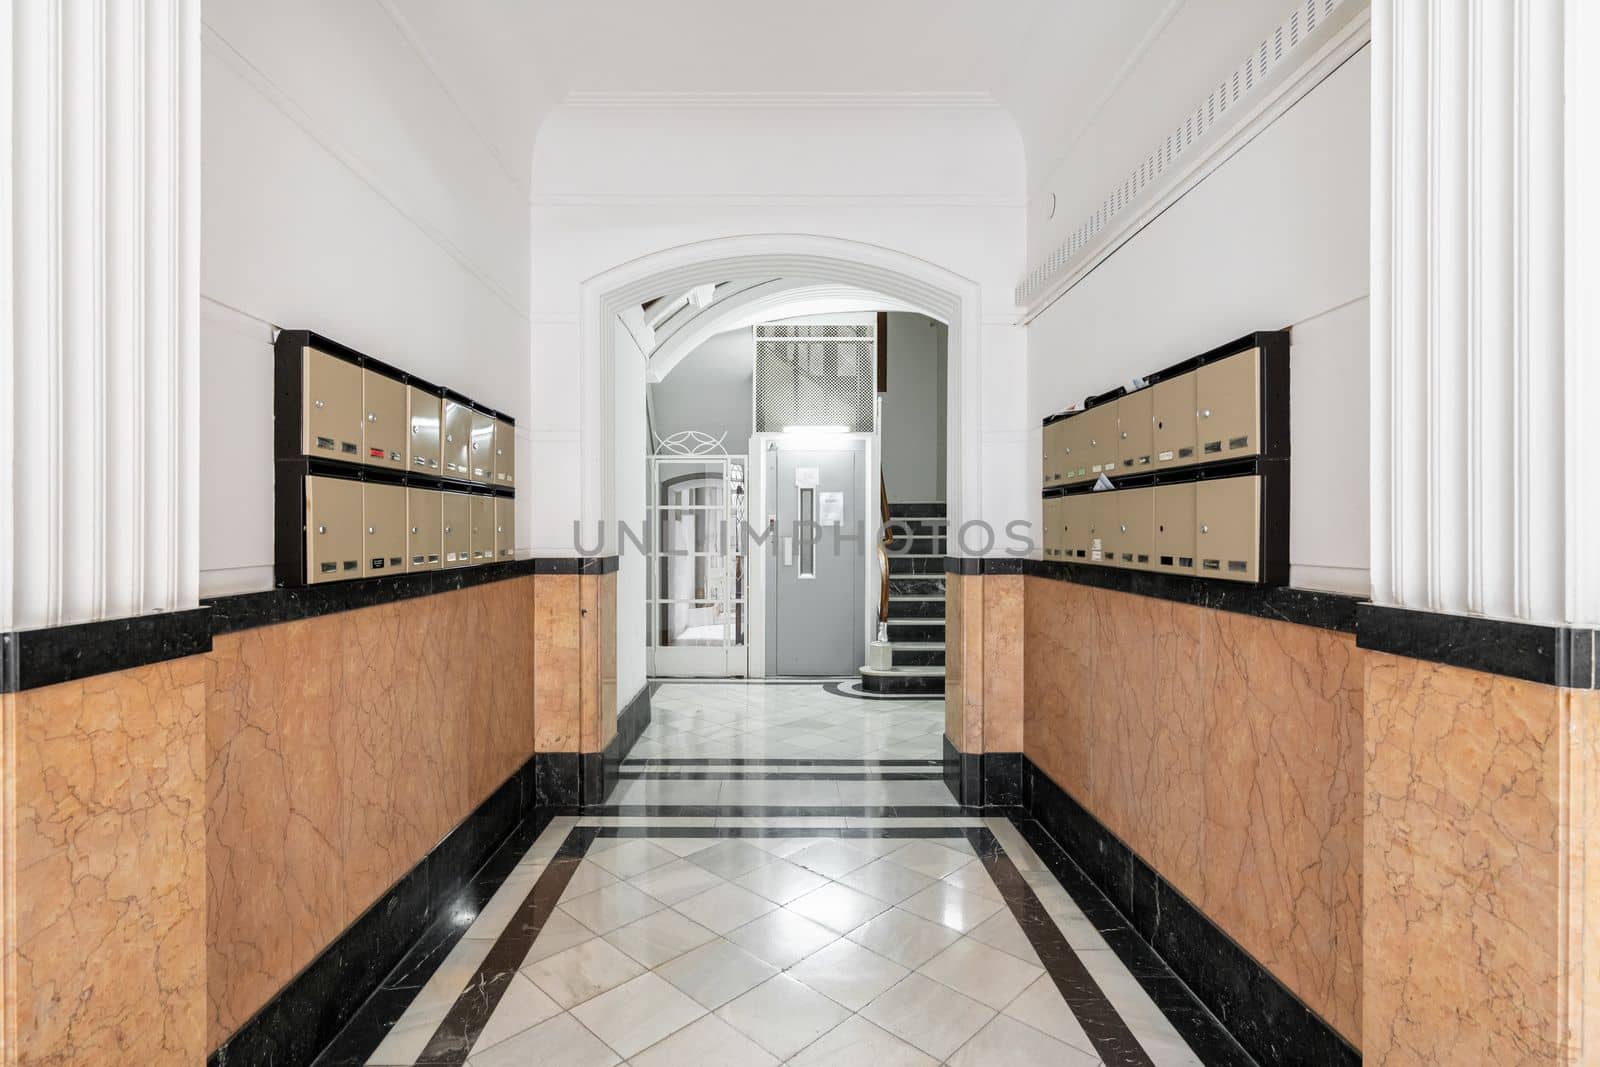 Long hall on the walls with orange marble tiles mailboxes on both sides for correspondence and letters. At the end of the hall there is a modern elevator to other floors and stairs